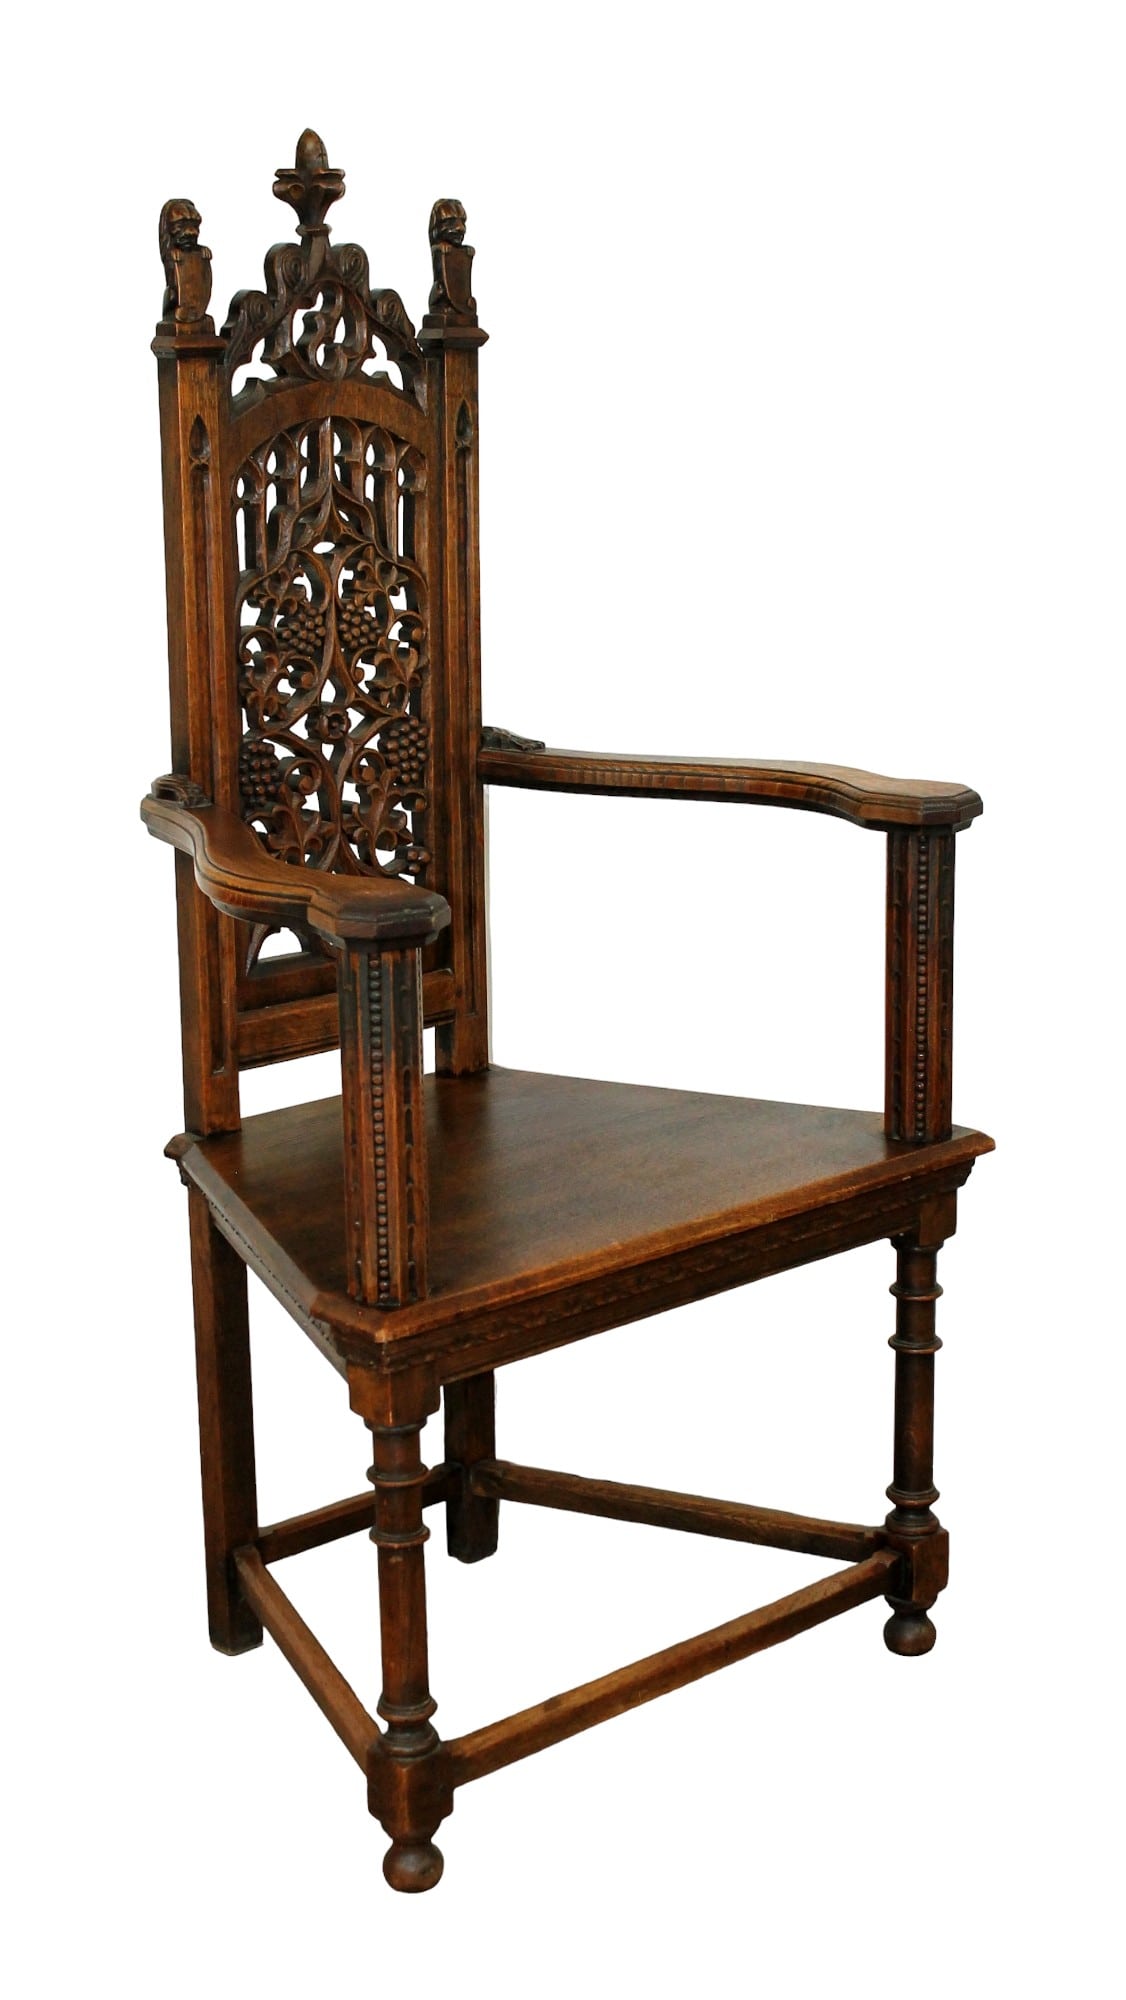 French Gothic revival pierce carved back chair